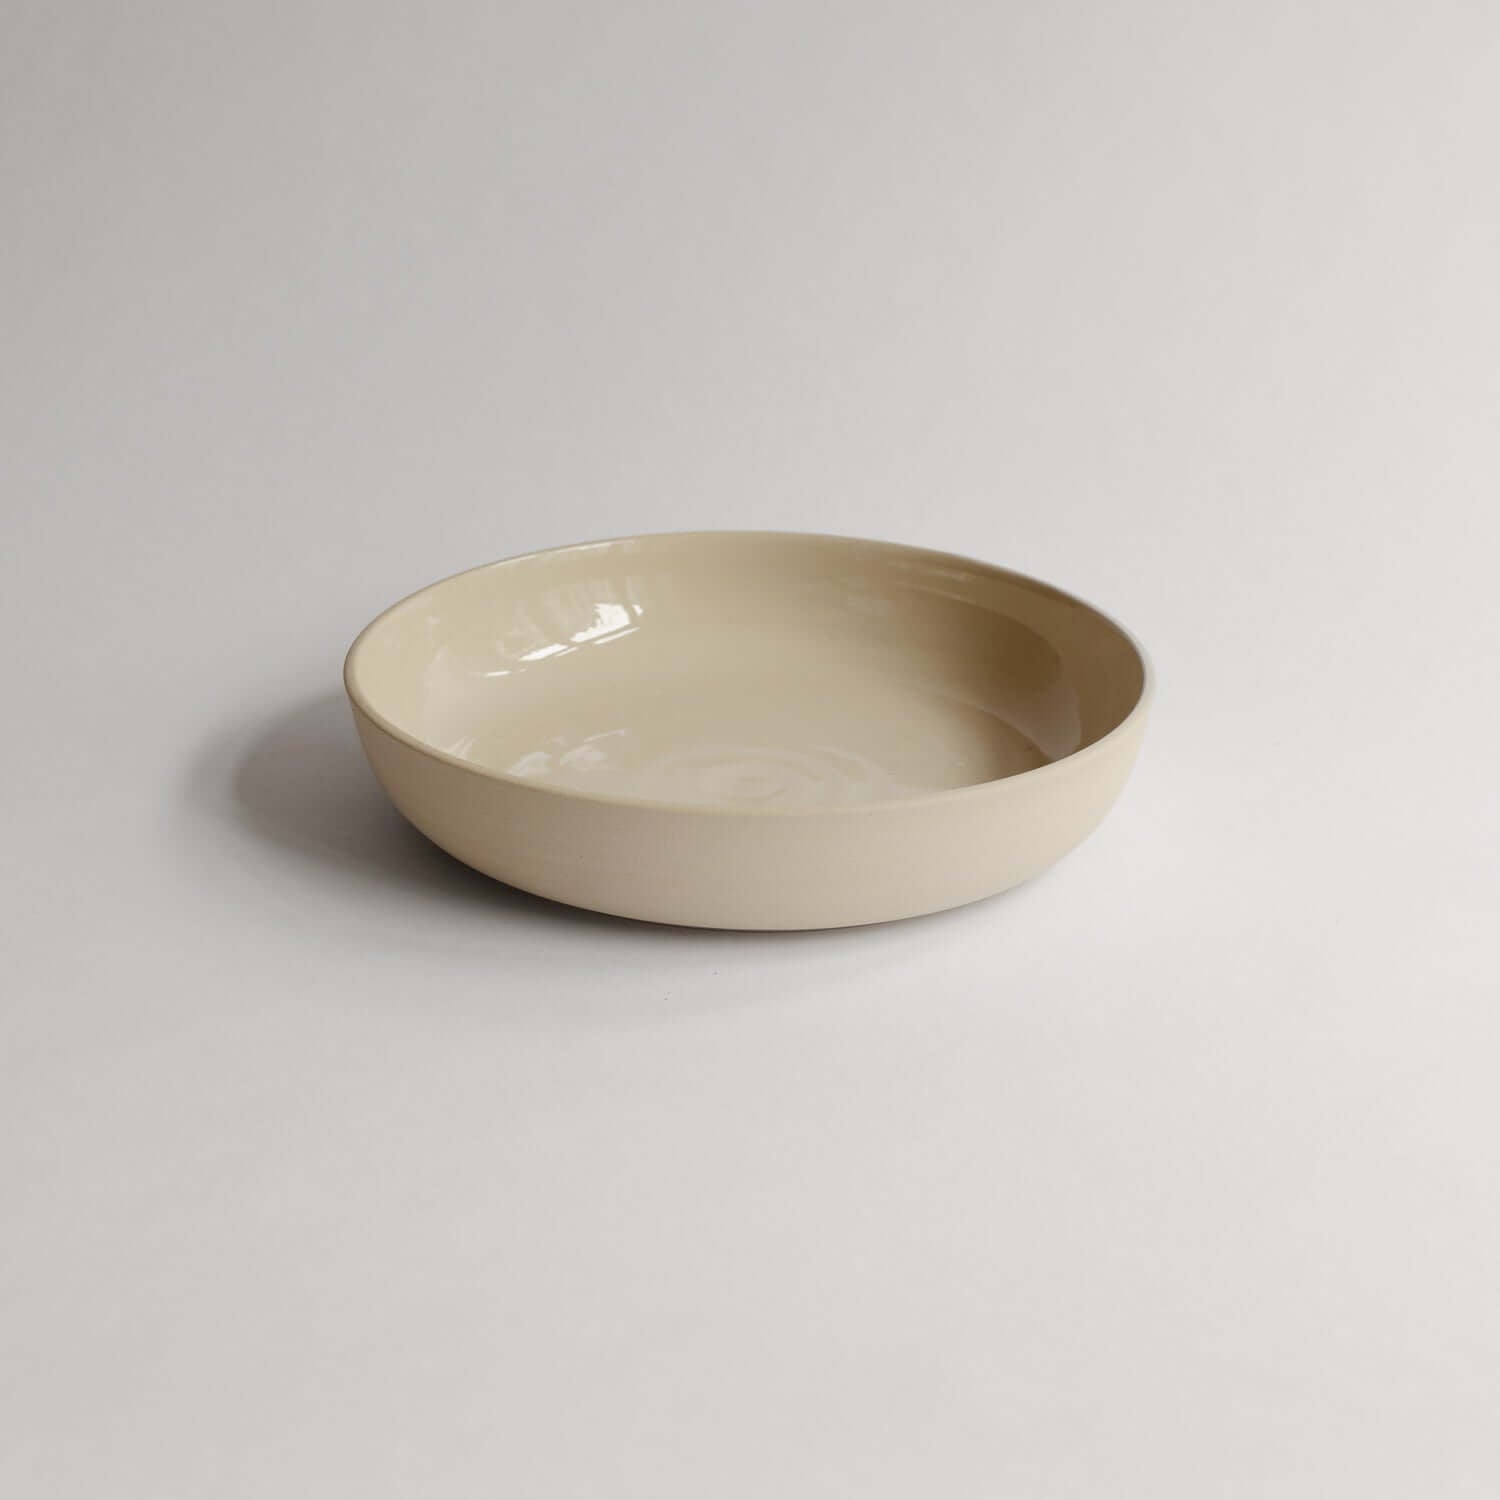 Our Creme Dinner Bowl merges practicality & style—a unique stoneware piece with a glossy interior, perfect for your favorite dishes. von viola beuscher ceramics